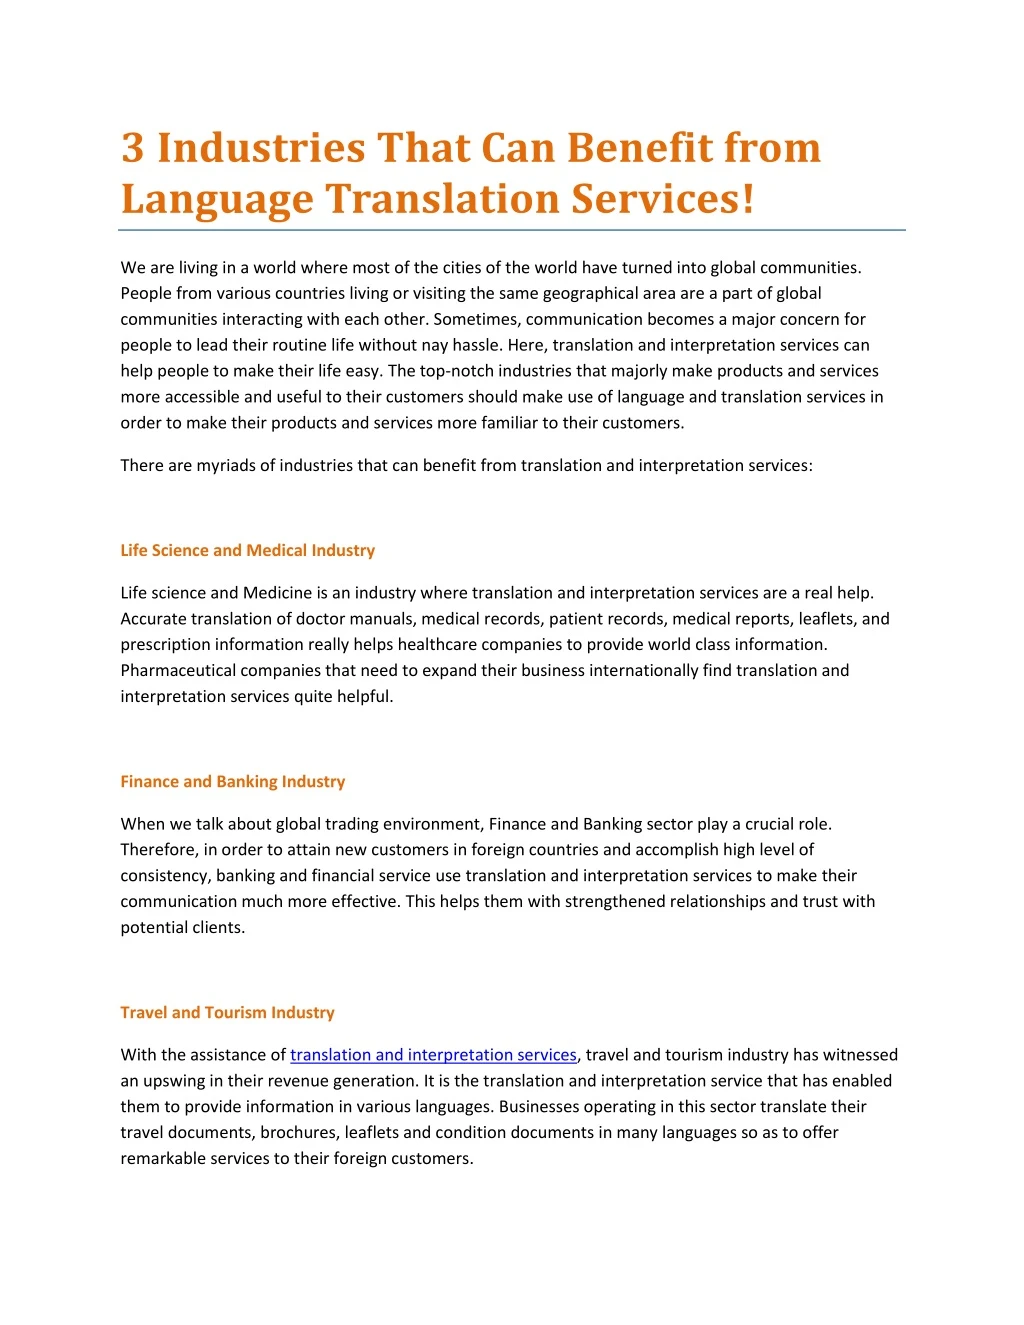 3 industries that can benefit from language